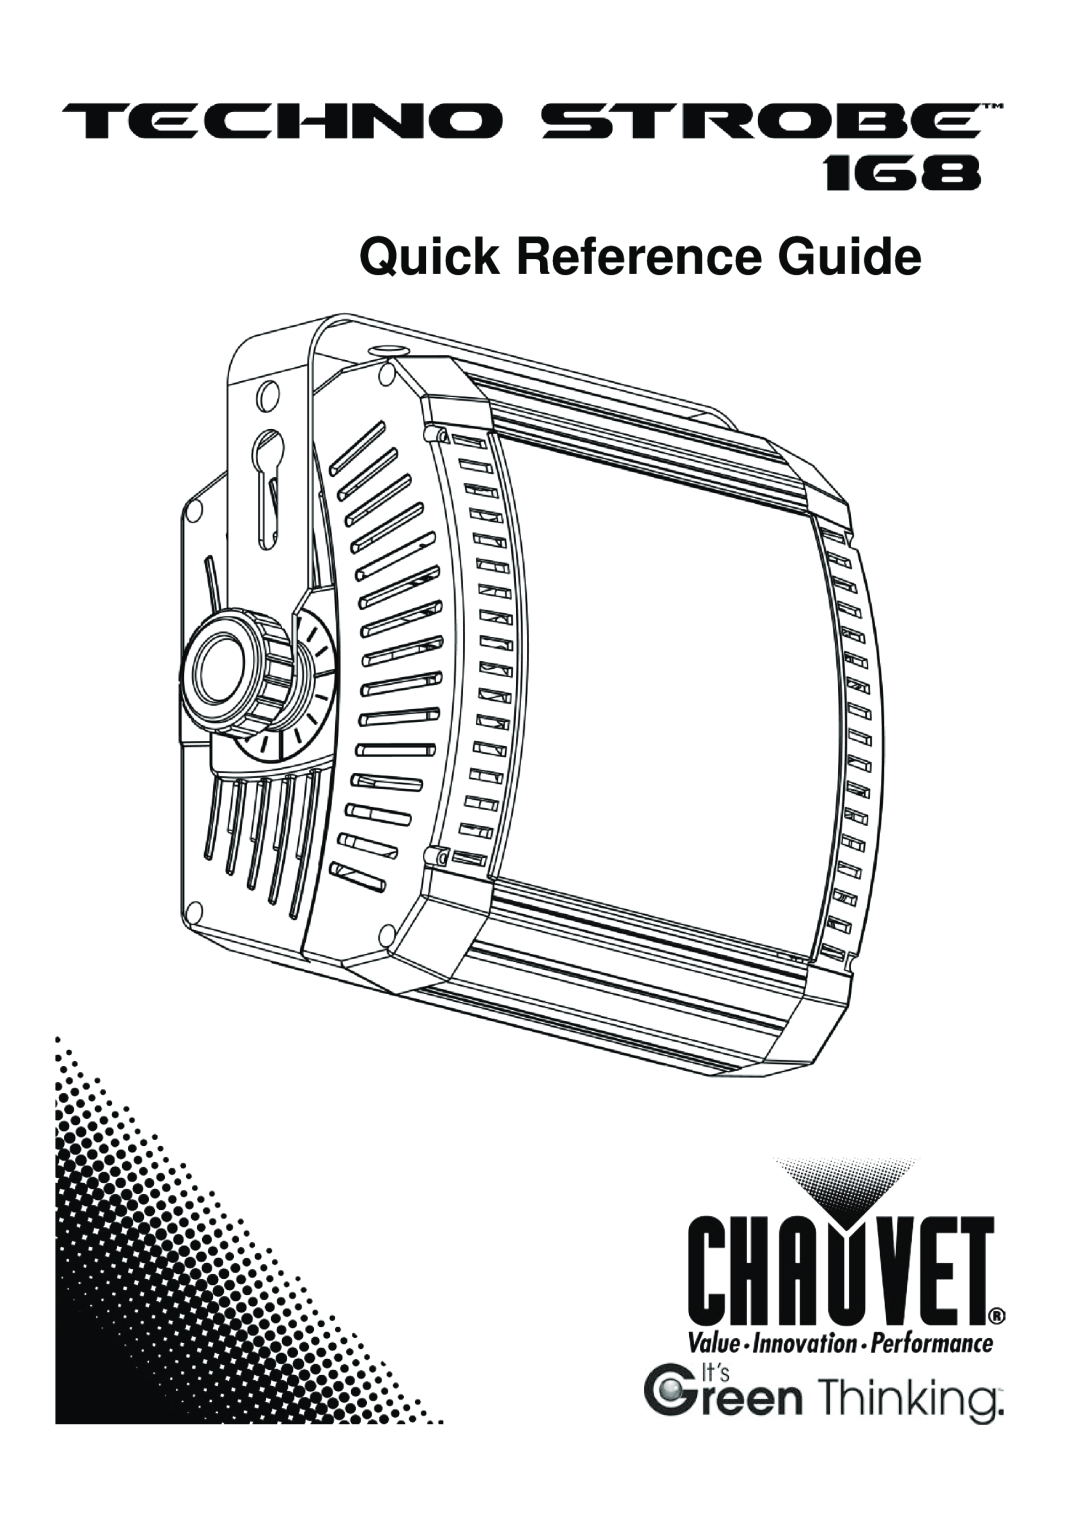 Chauvet 168 manual Quick Reference Guide 